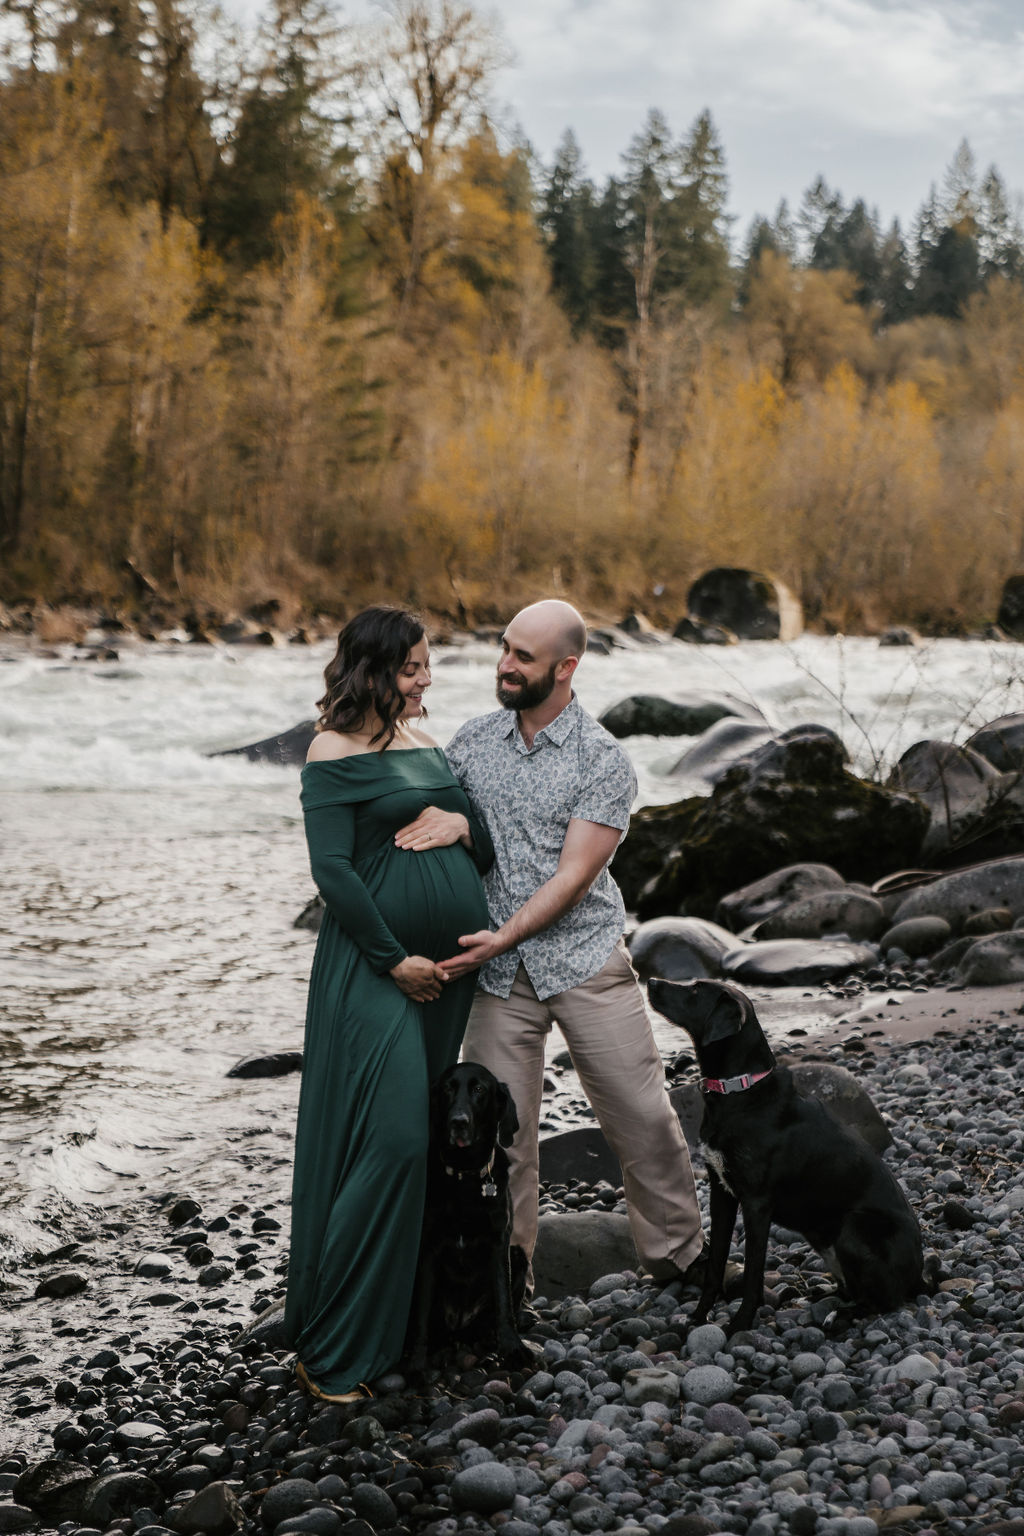 Maternity photography at Dodge Park by Natalie Broders